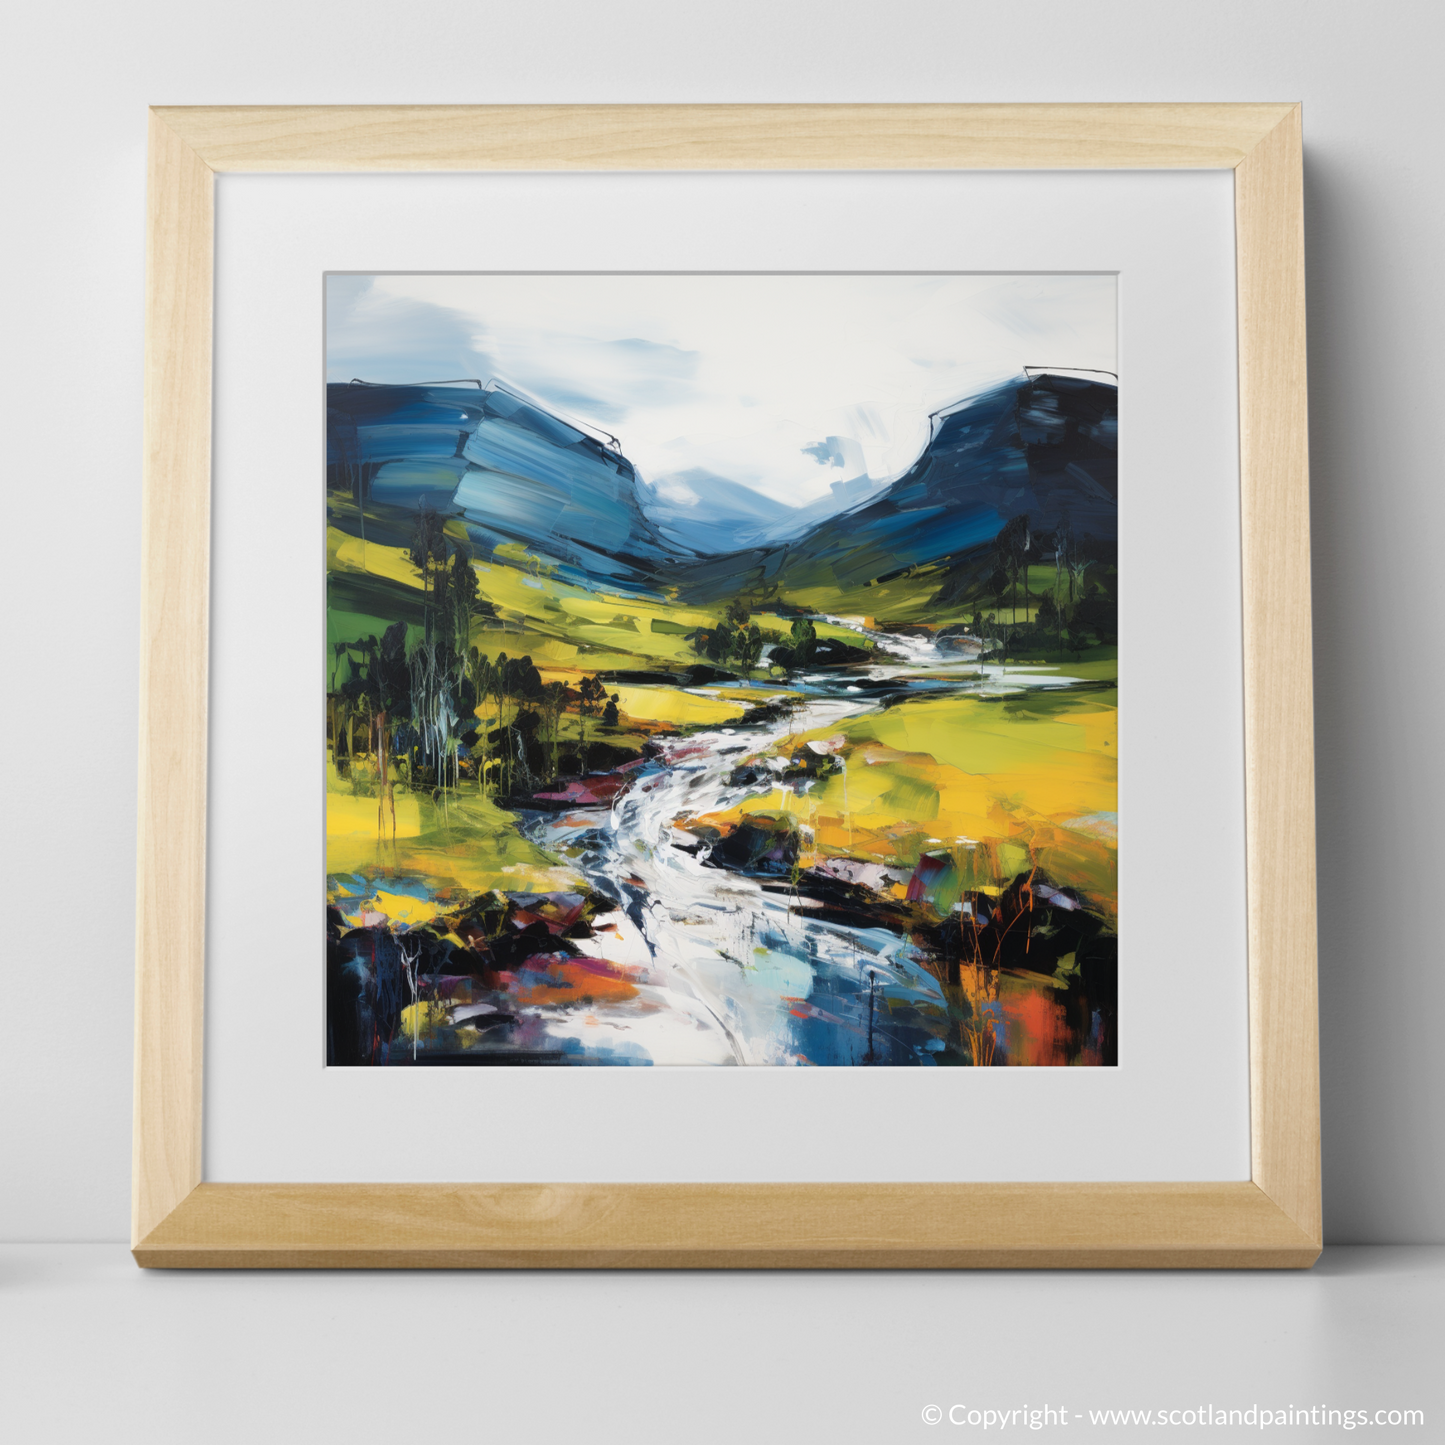 Art Print of Glen Esk, Angus with a natural frame